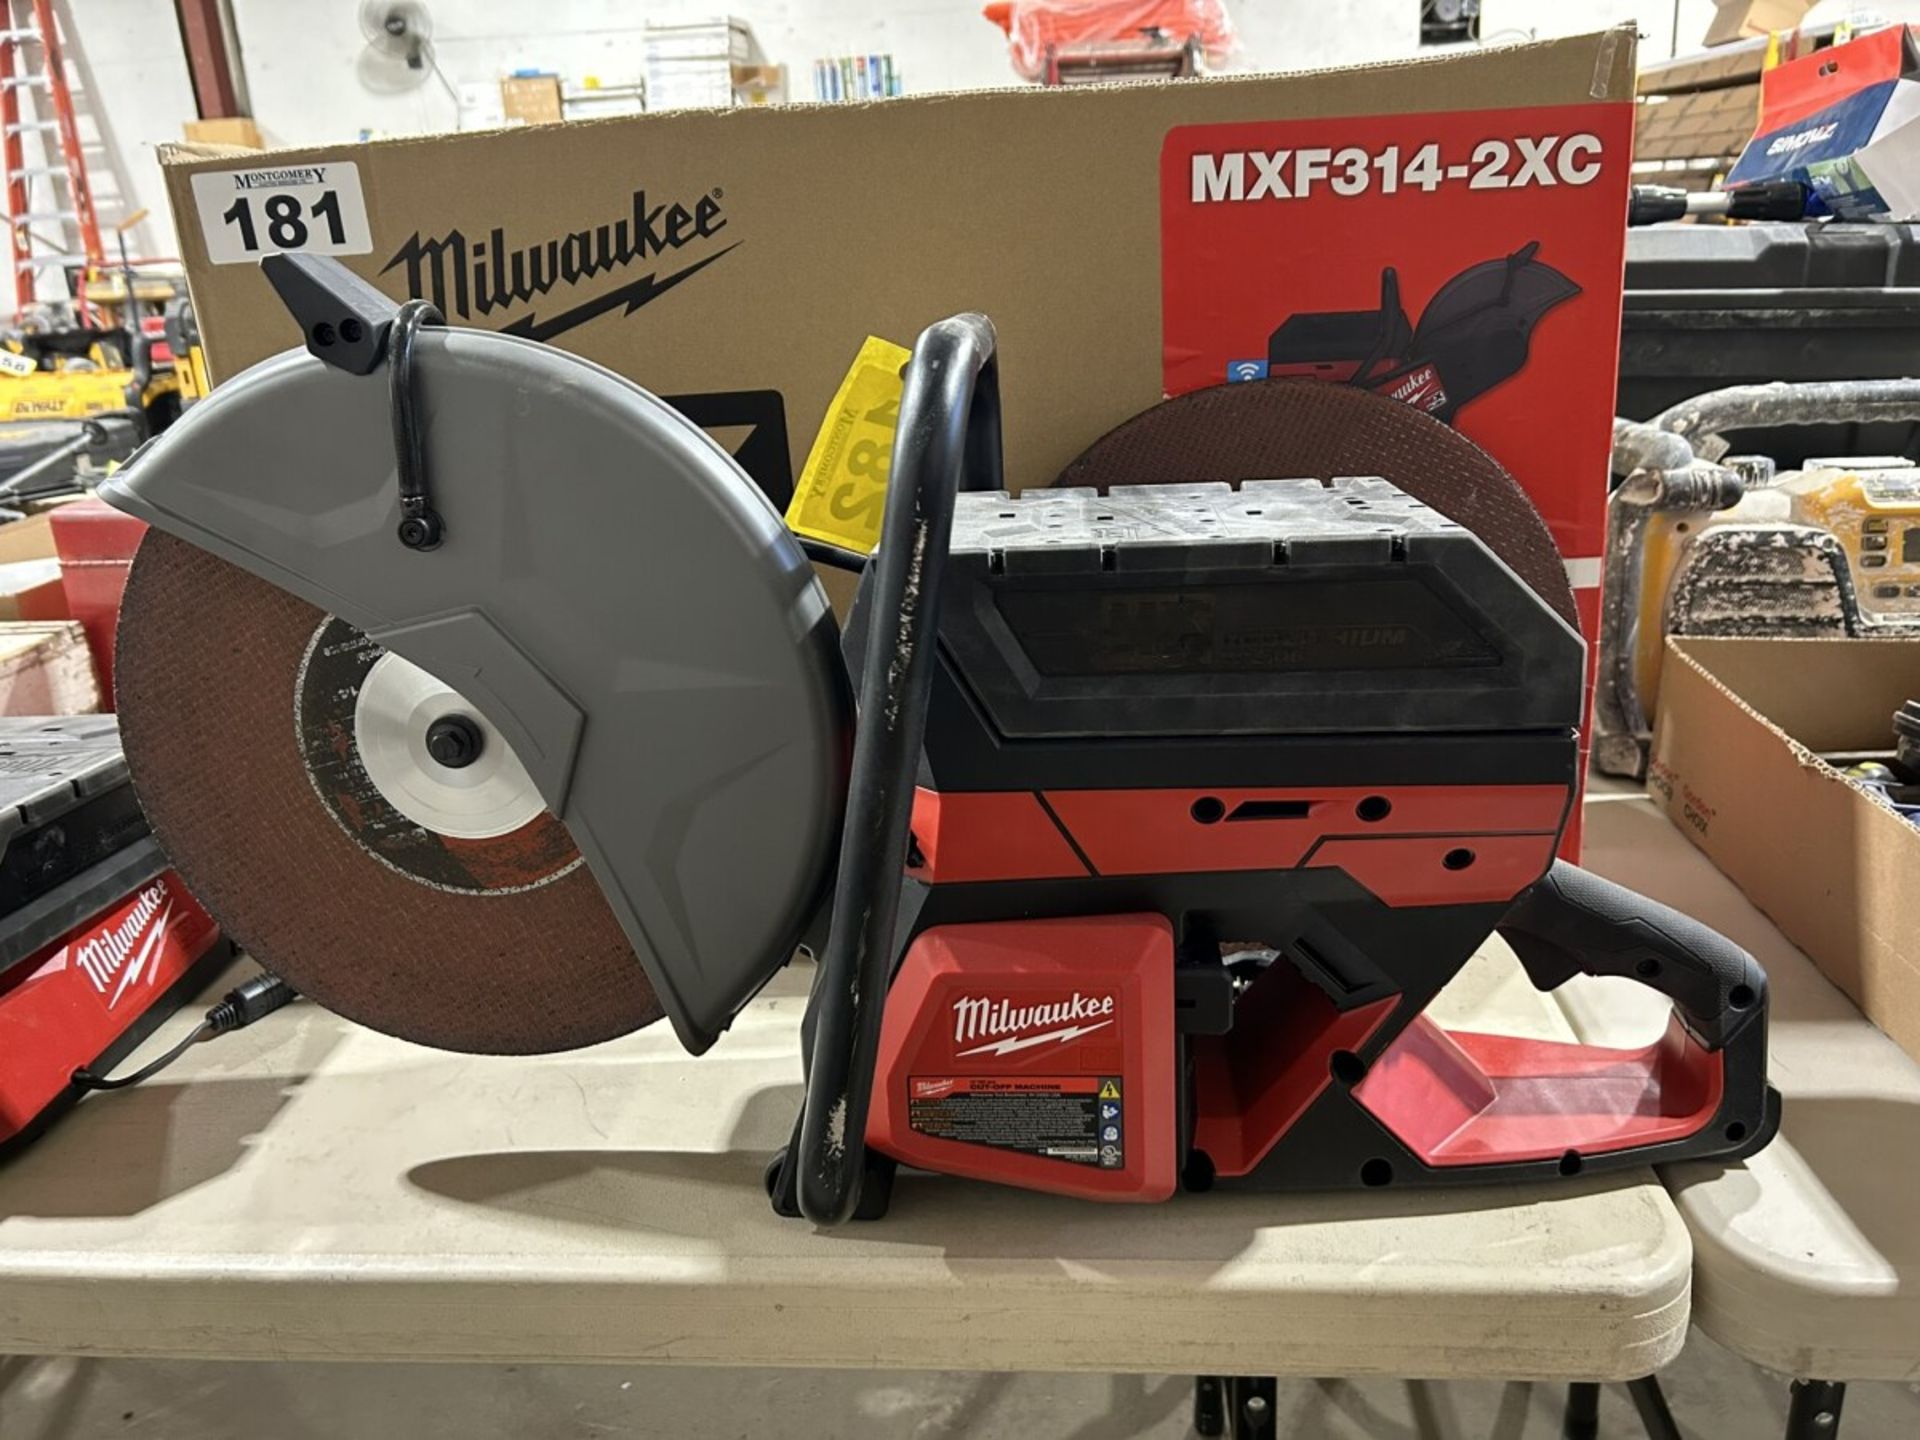 MILWAUKEE MXF314-2XC CORDLESS 14" DEMOLITION SAW W/ 2 XC406 BATTERIES AND CHARGER (USED ONE TIME) - Image 7 of 7